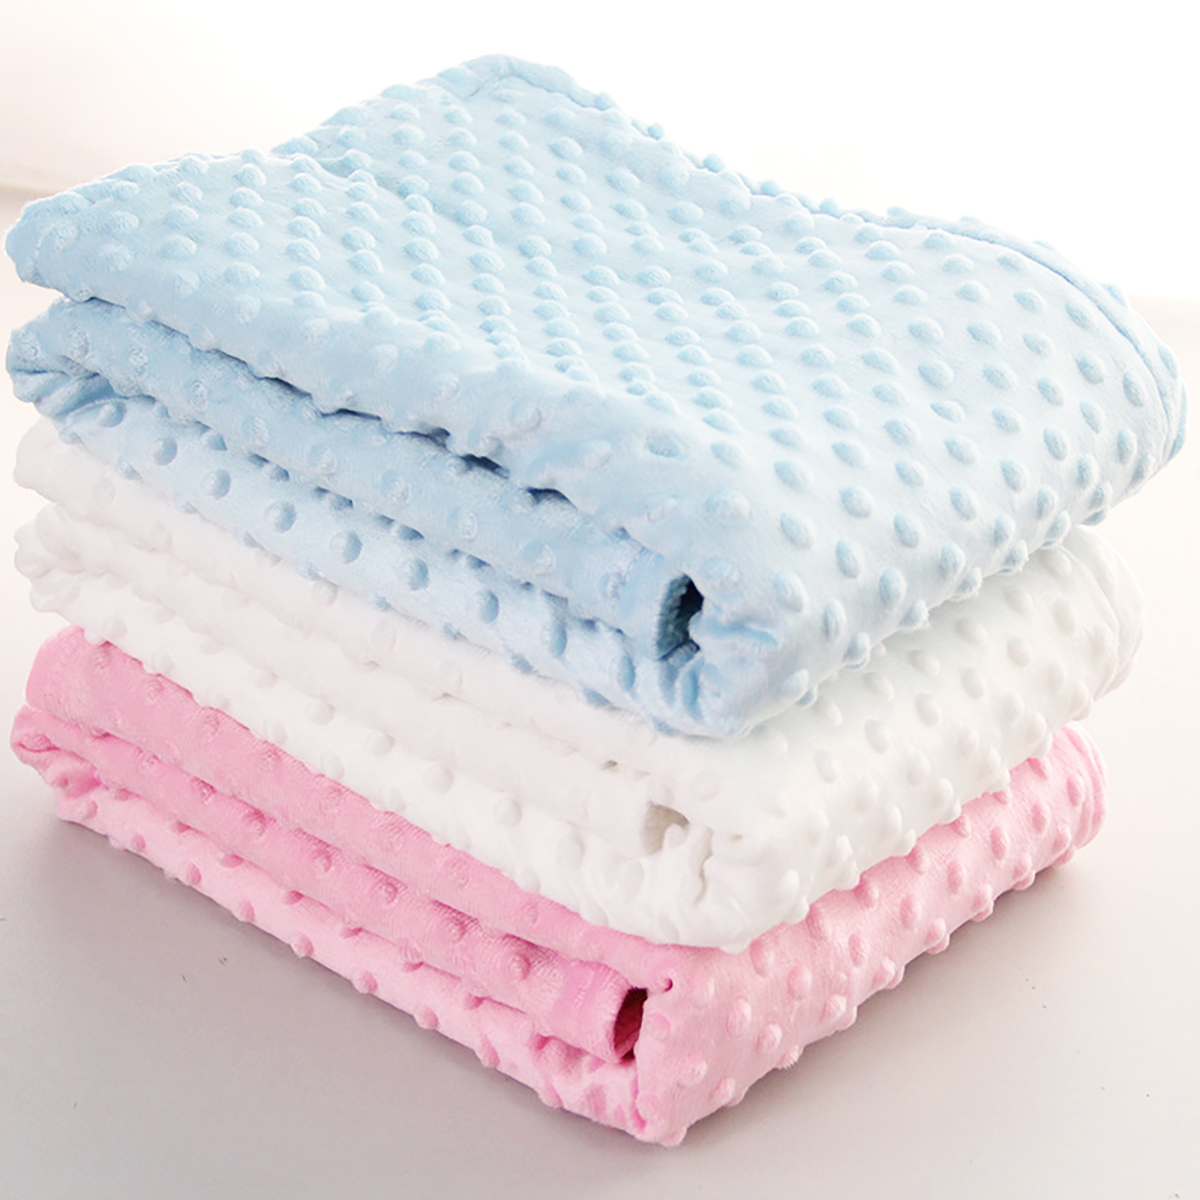 

Cozy Comfort: Soft, Colorful Blanket For Your Baby - 29.5inx39.3in, Christmas, Halloween, Thanksgiving Day Gift